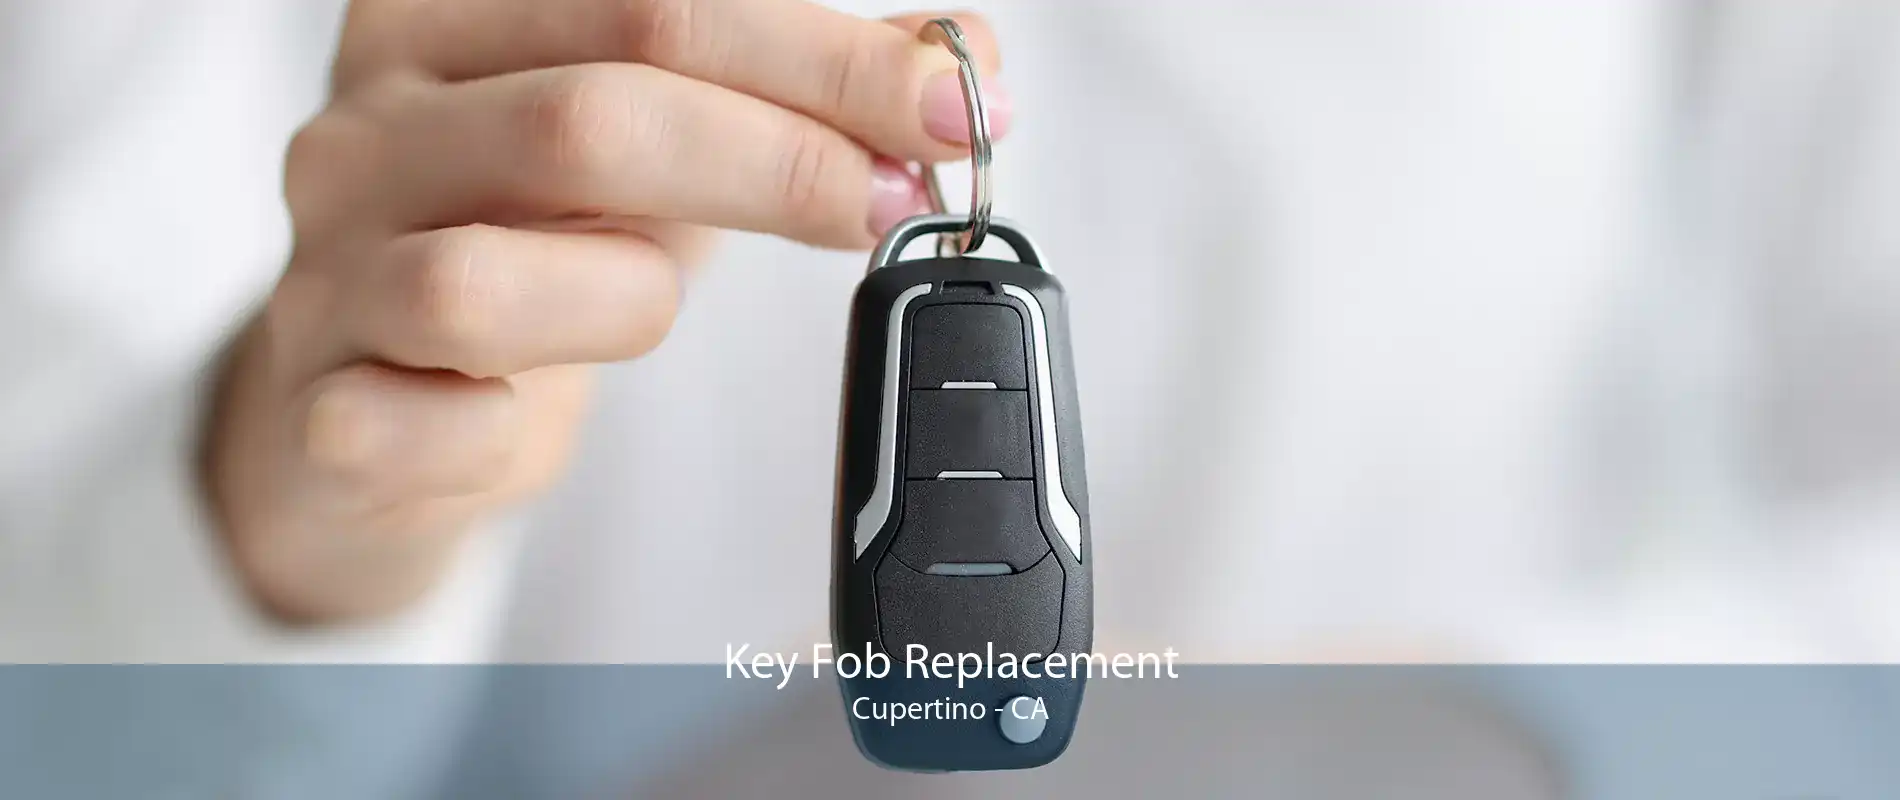 Key Fob Replacement Cupertino - CA